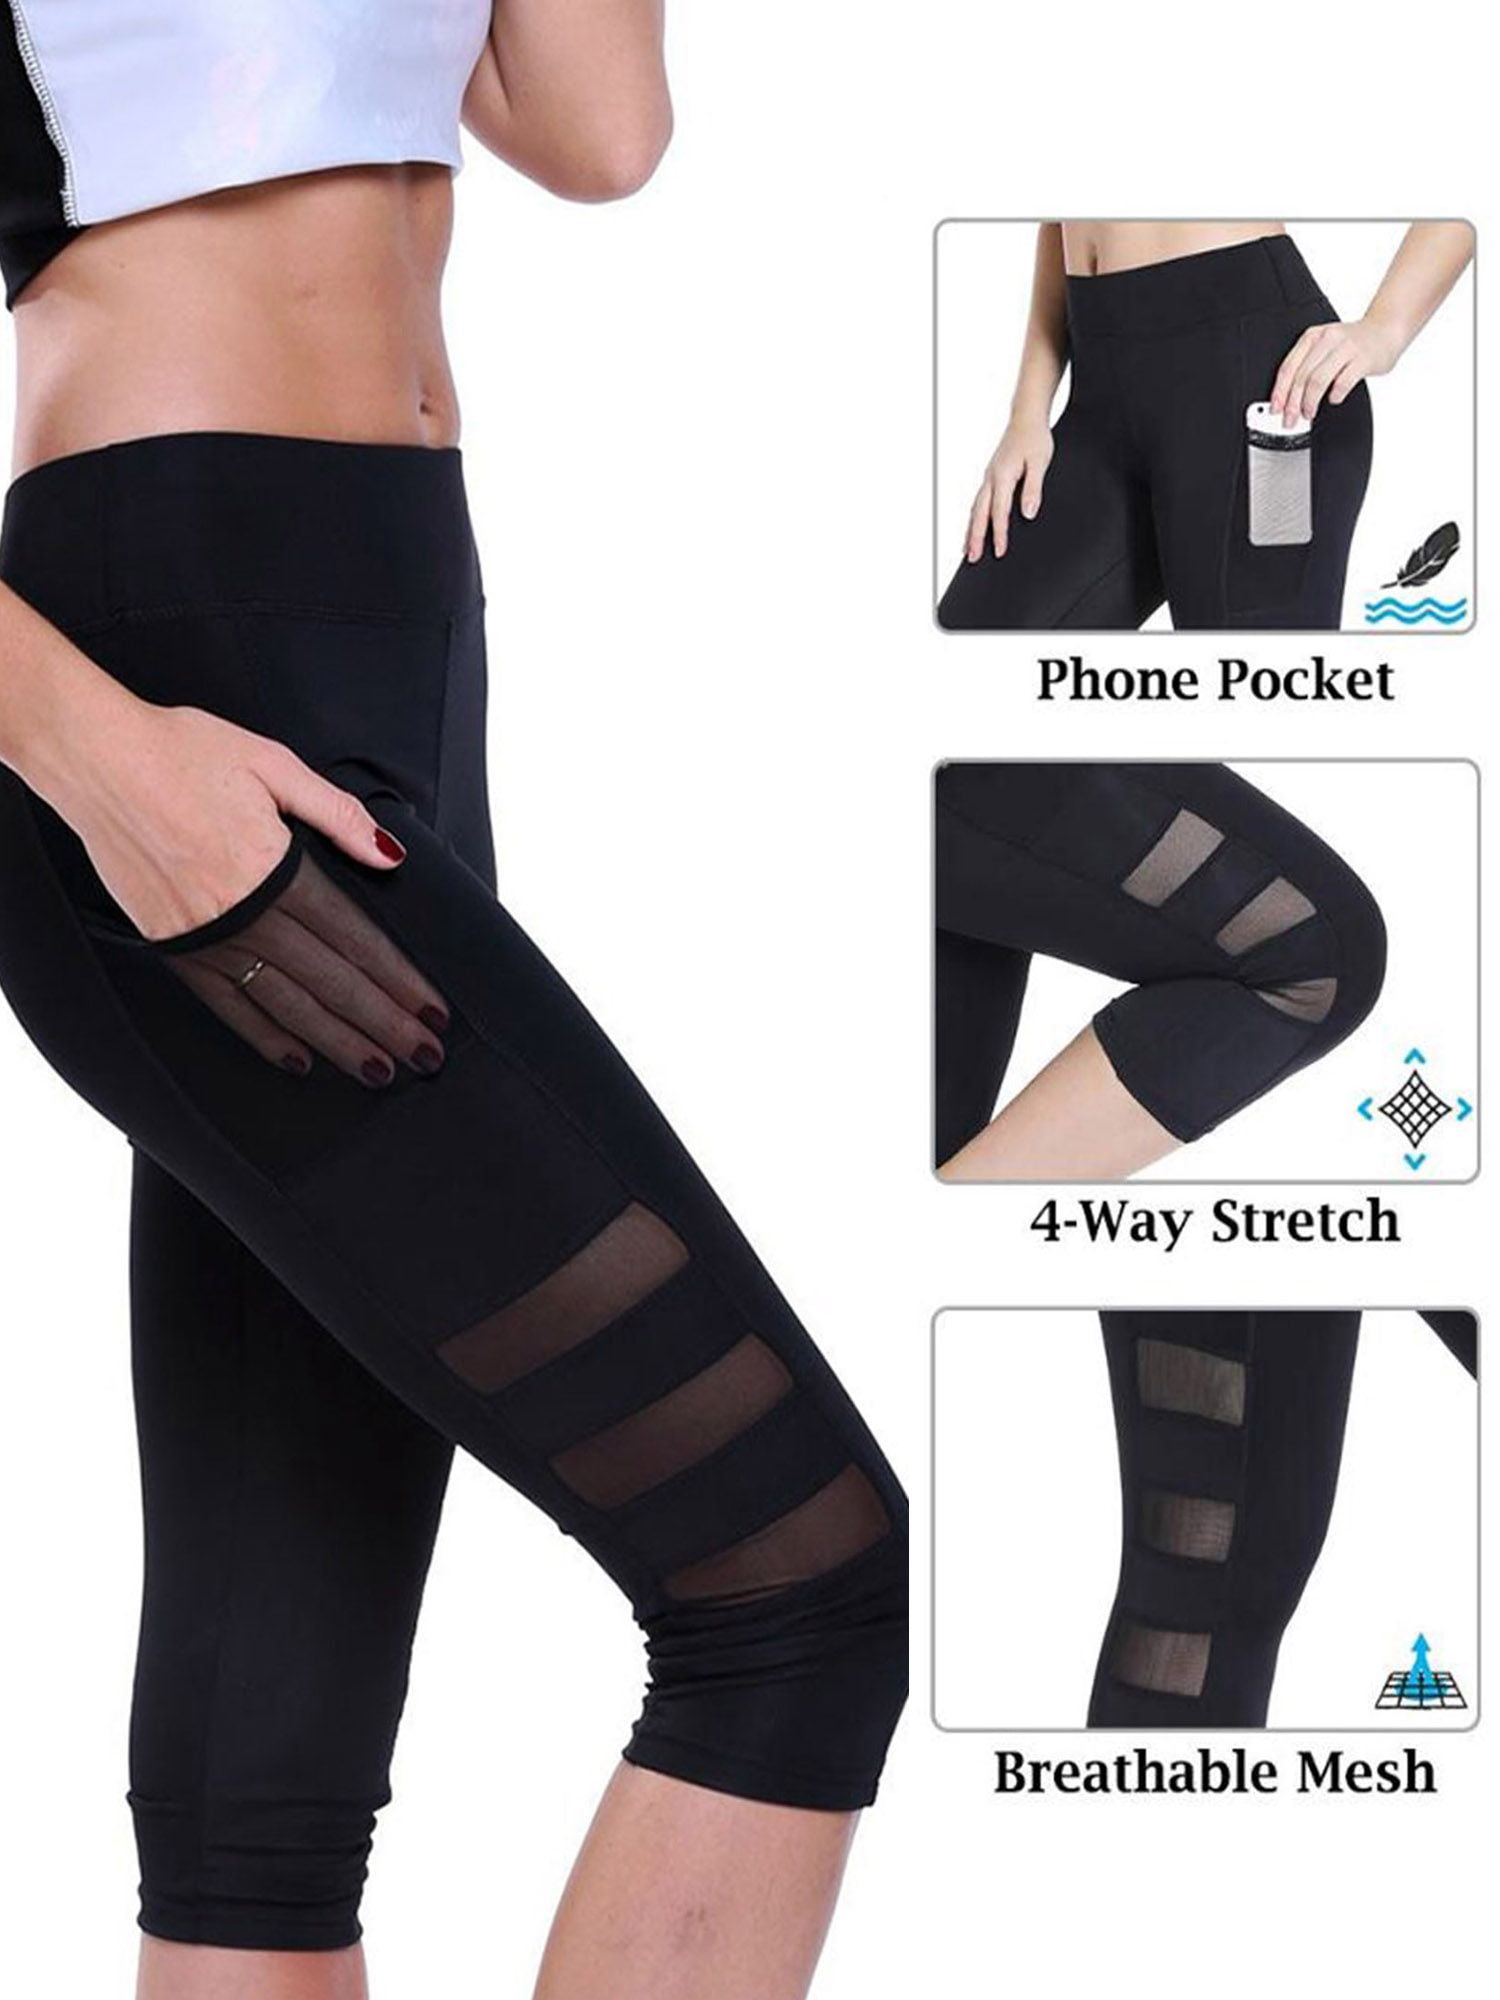 PULLIMORE Women's High Waist Yoga Pants Mesh Running Capri Pants with Side  Pockets Tummy Control Workout Running 4 Way Stretch Sport Leggings Size M  